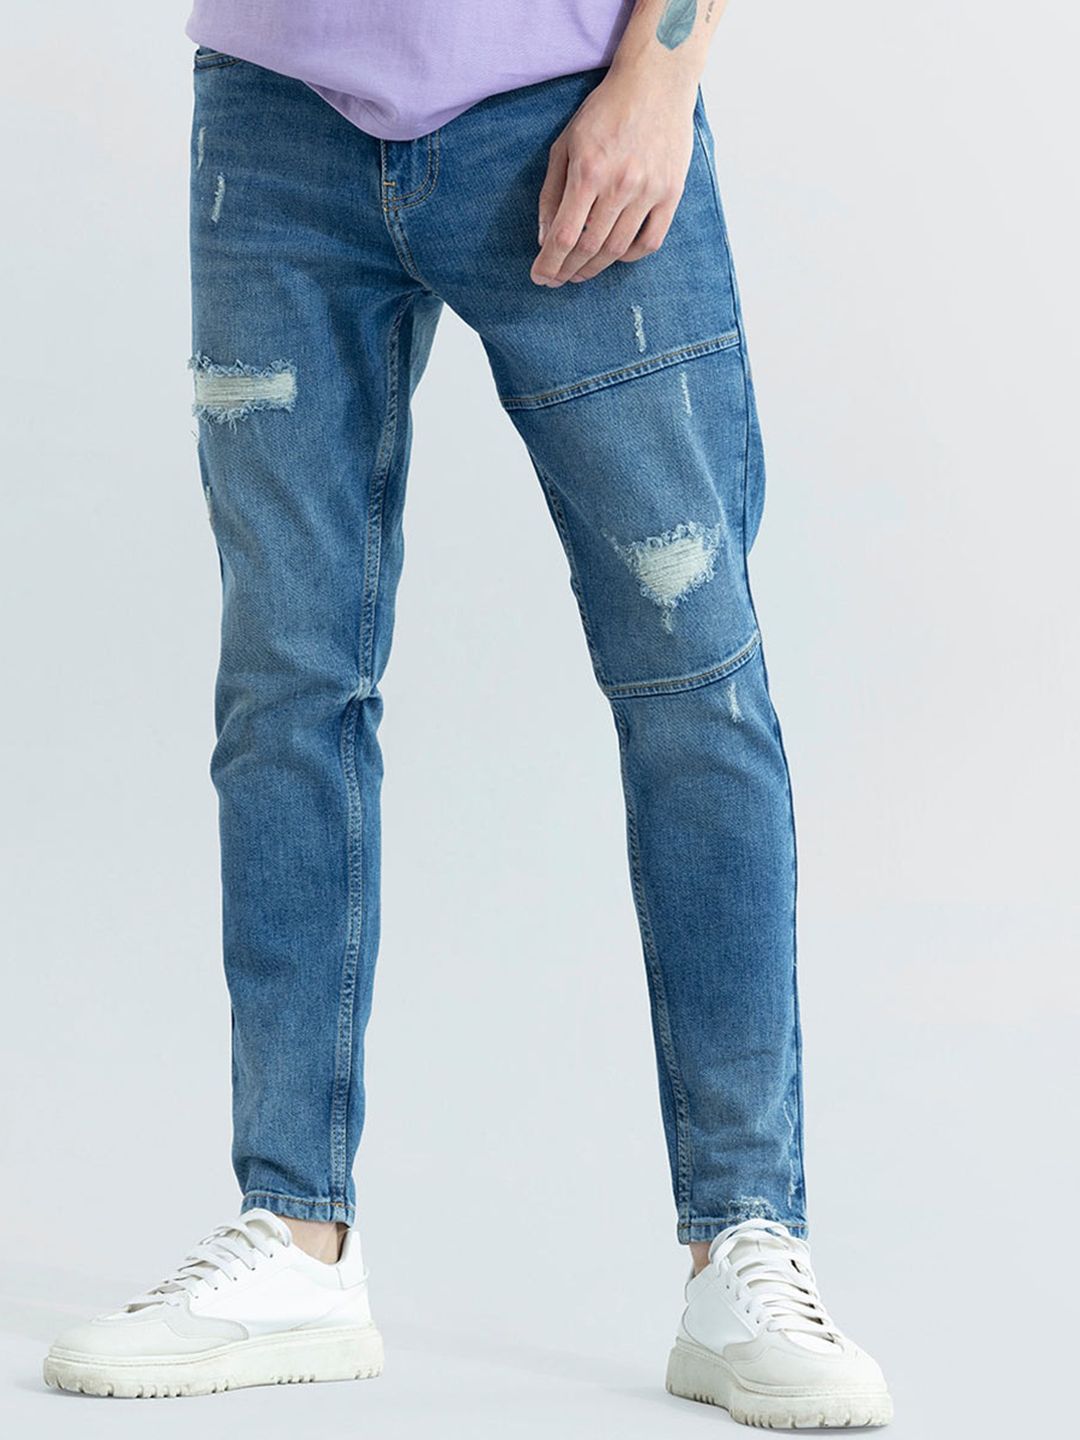 Snitch Men Skinny Fit Mildly Distressed Light Fade Jeans